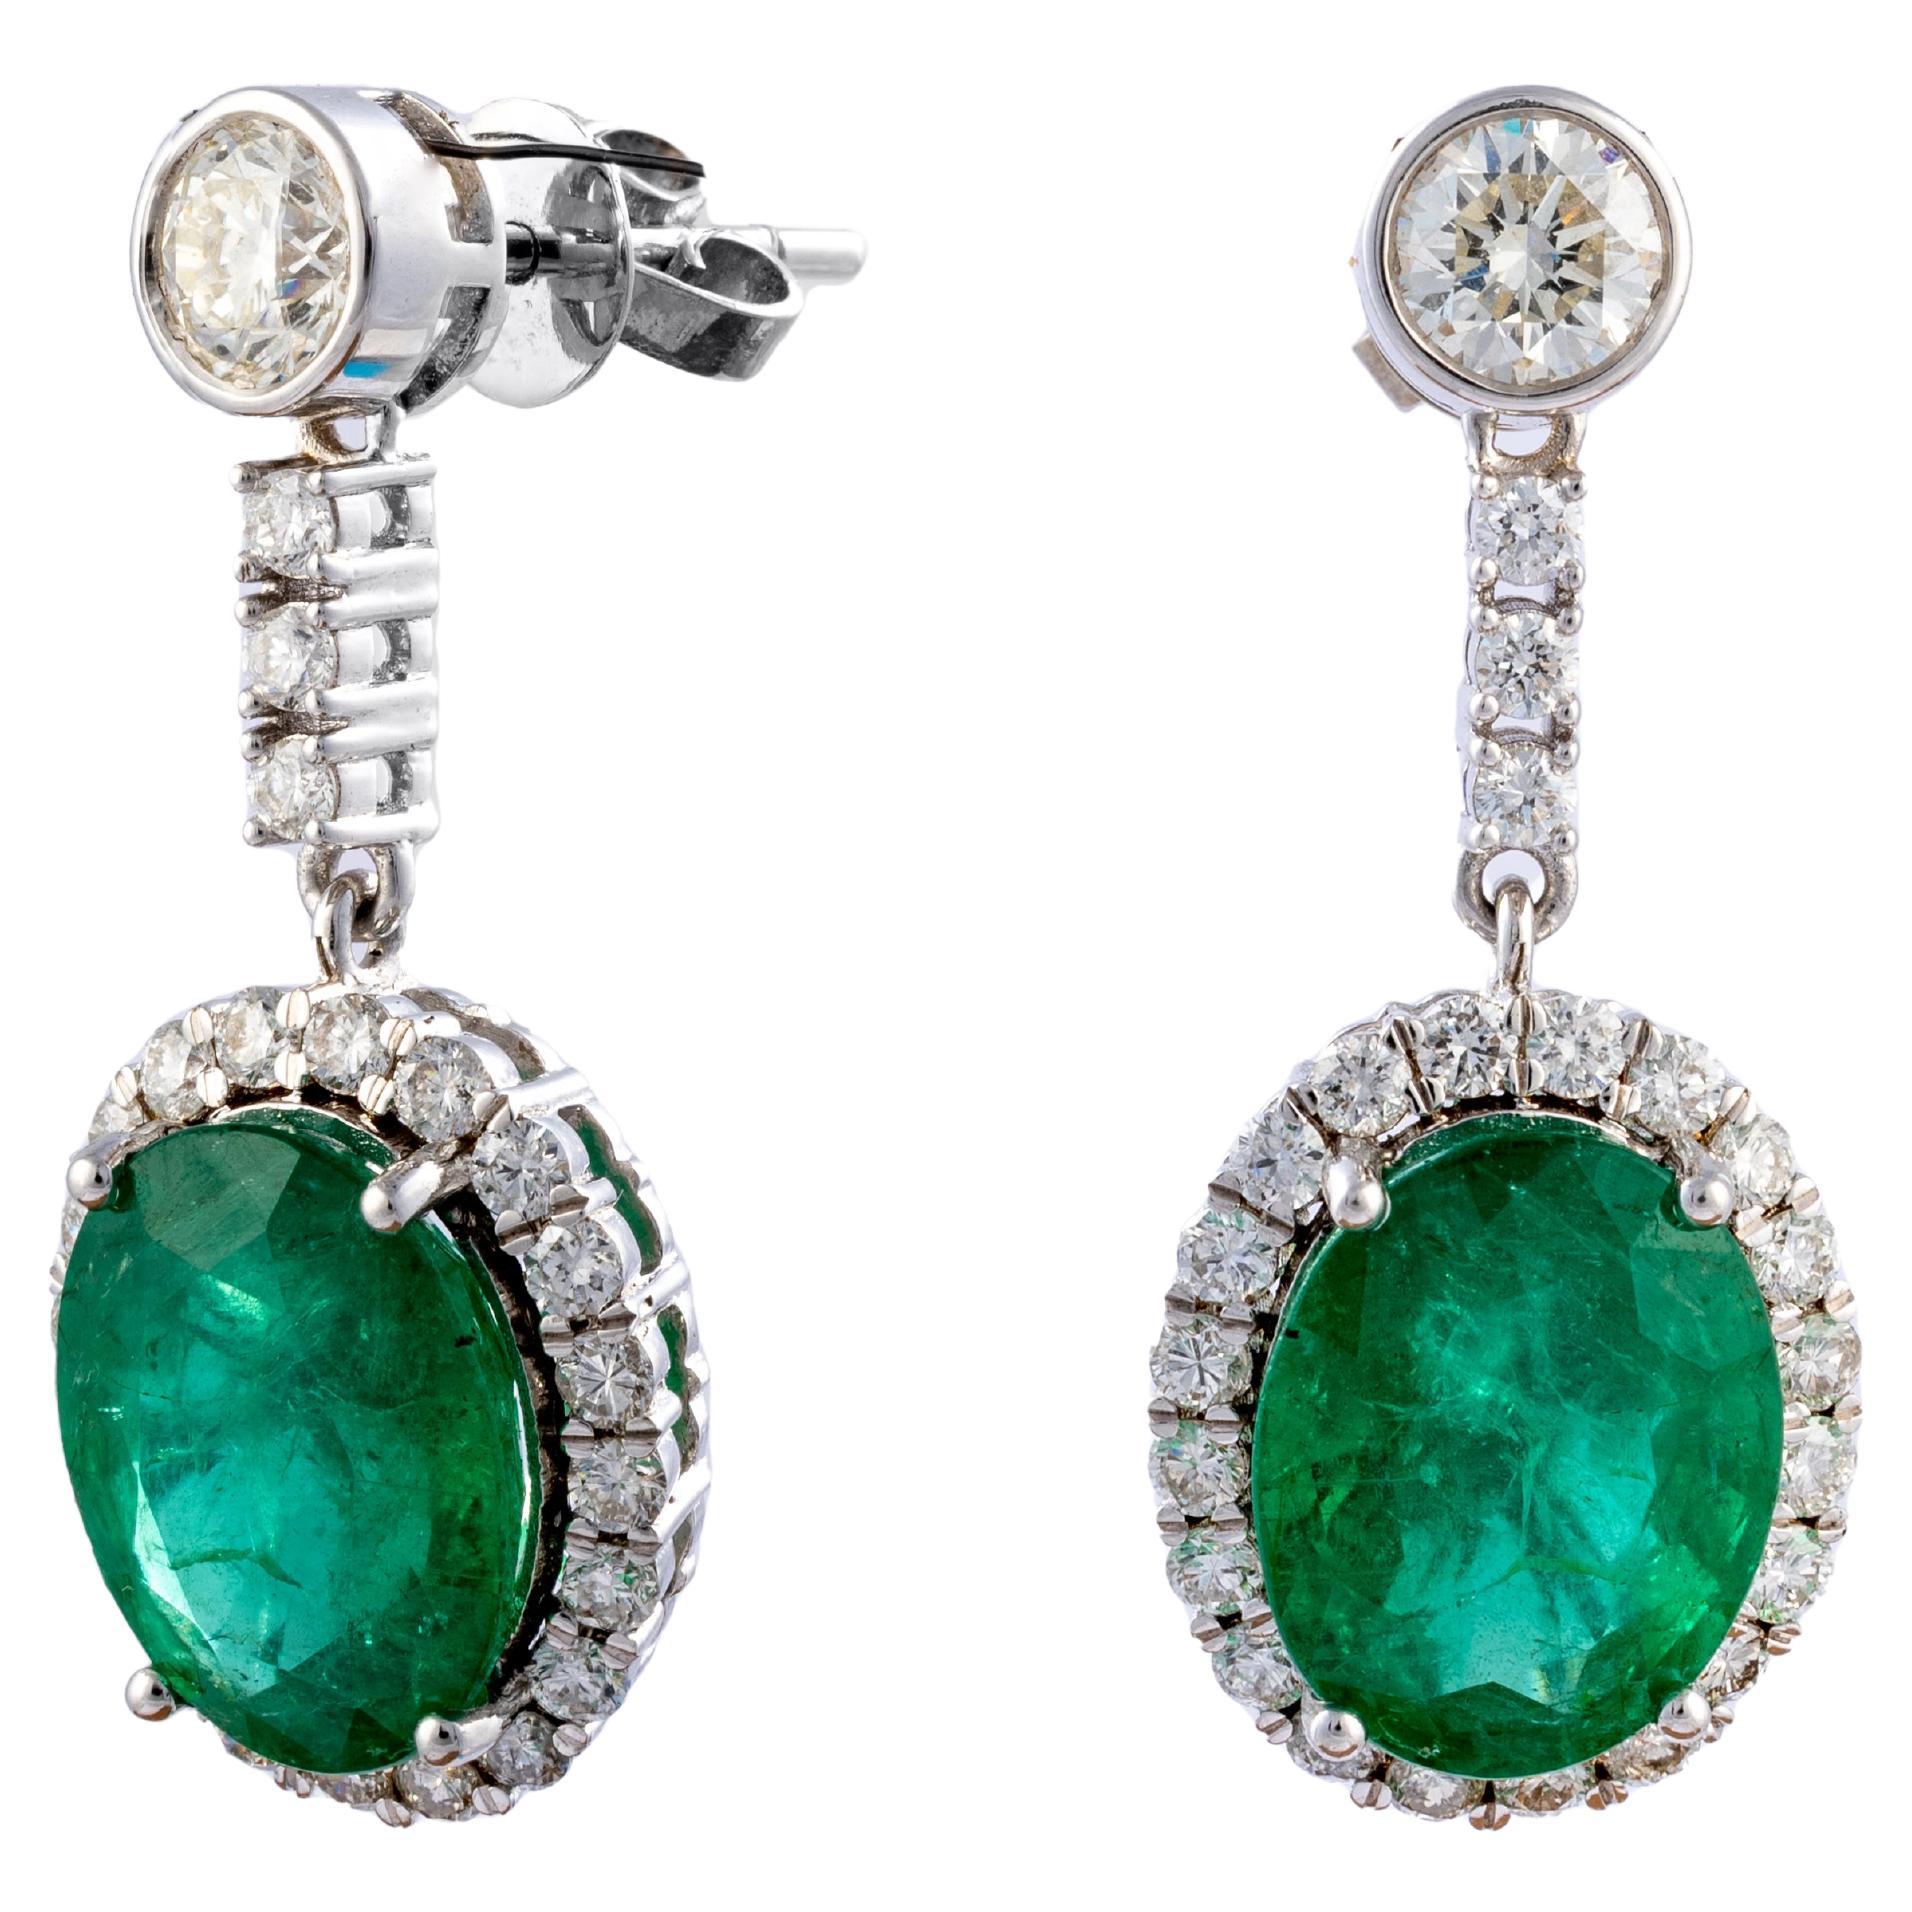 Natural Zambian Emerald Earring with Diamond and 14k Gold